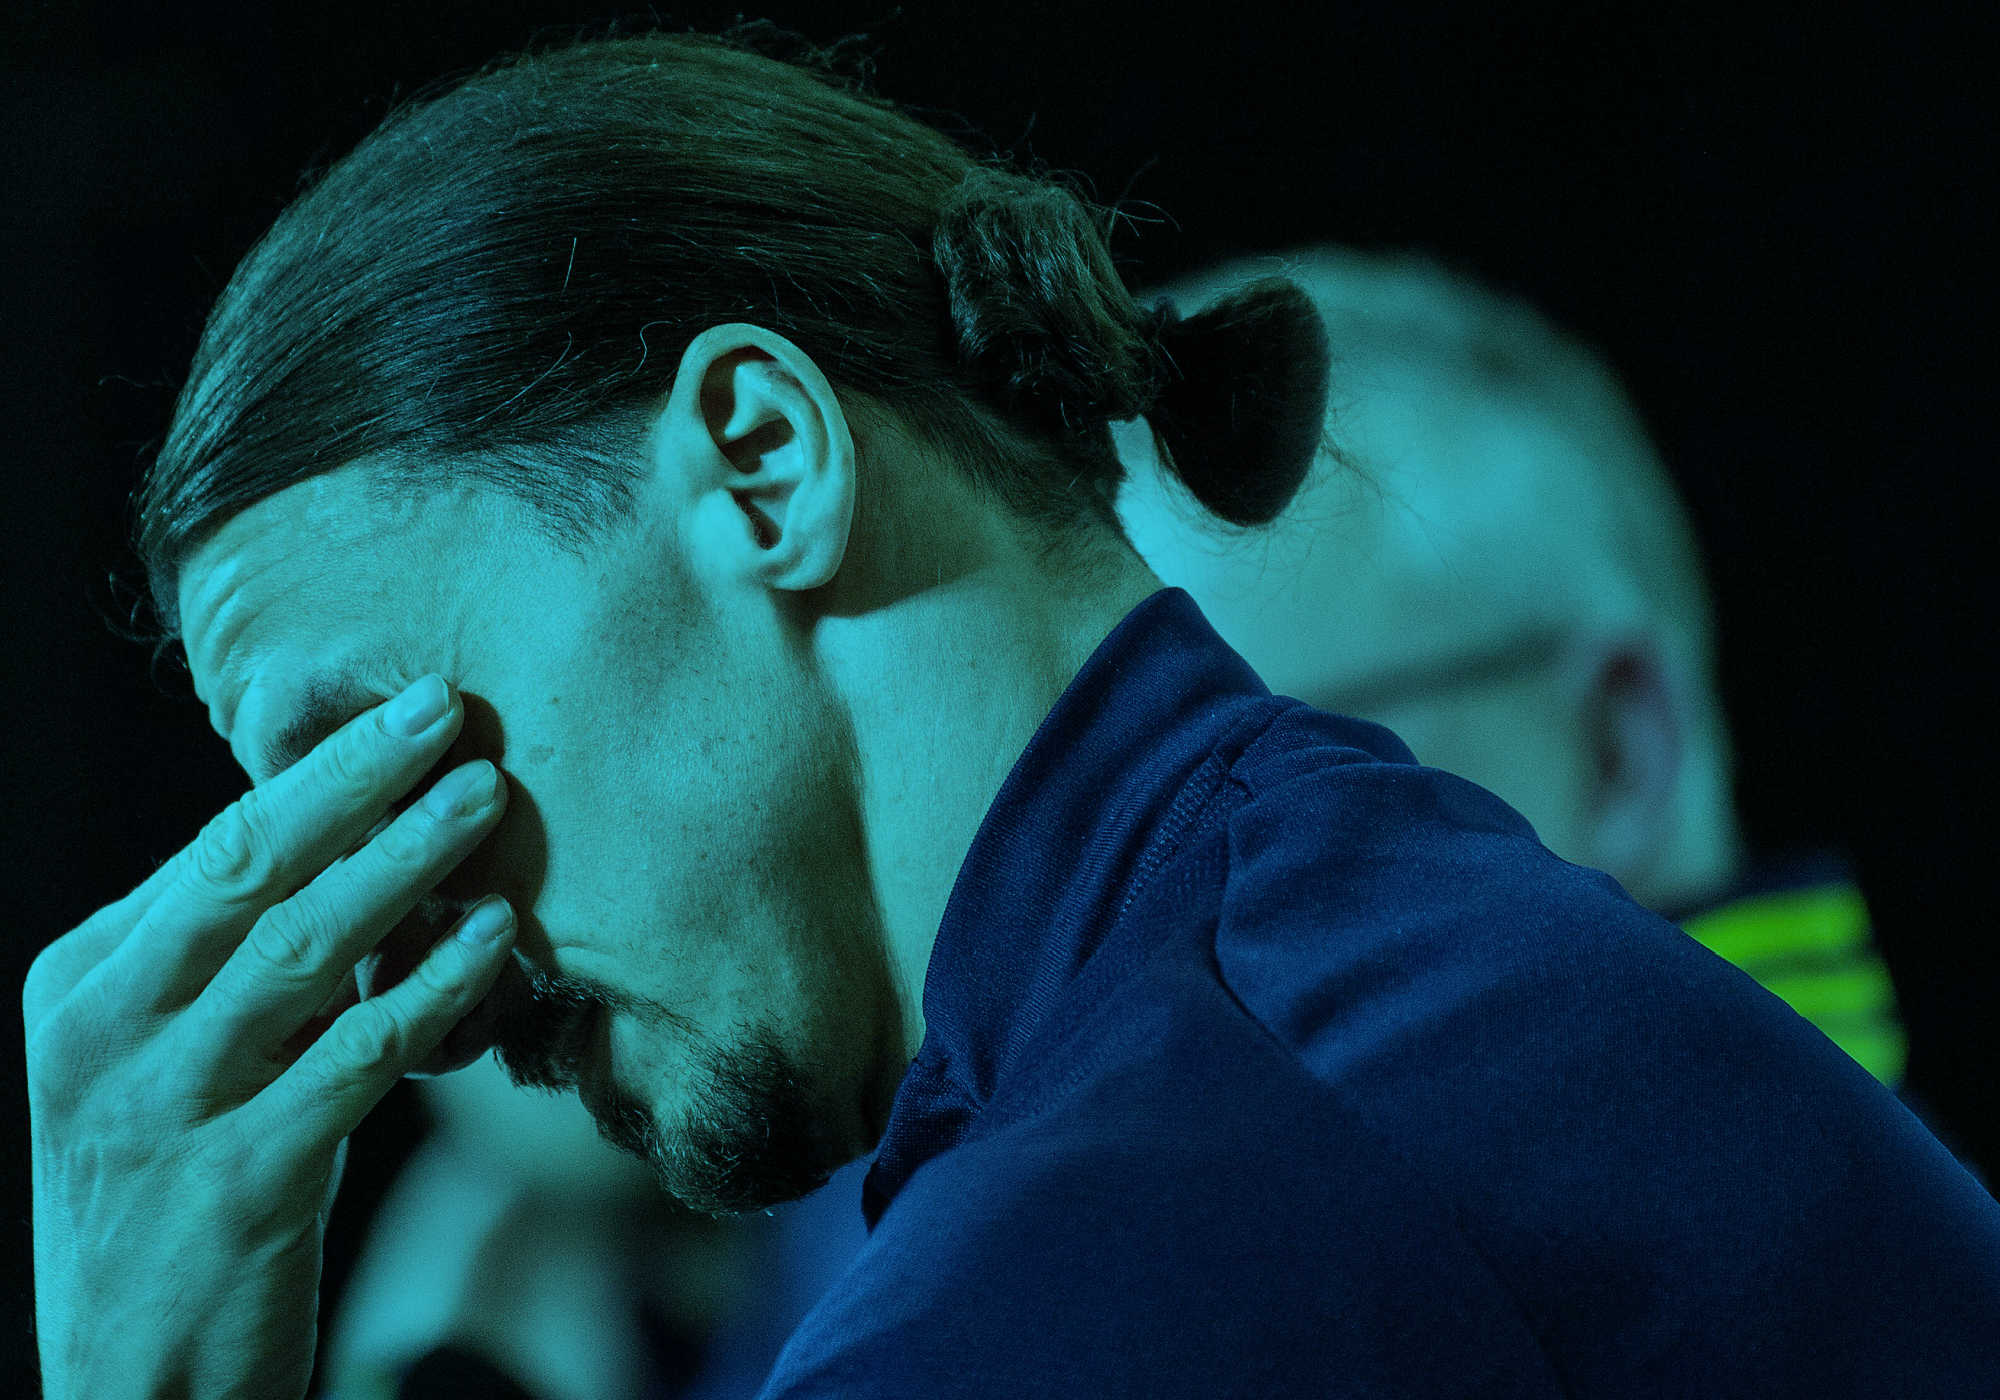 When lions cry – Zlatan Ibrahimovic moved to tears when asked a question about his family